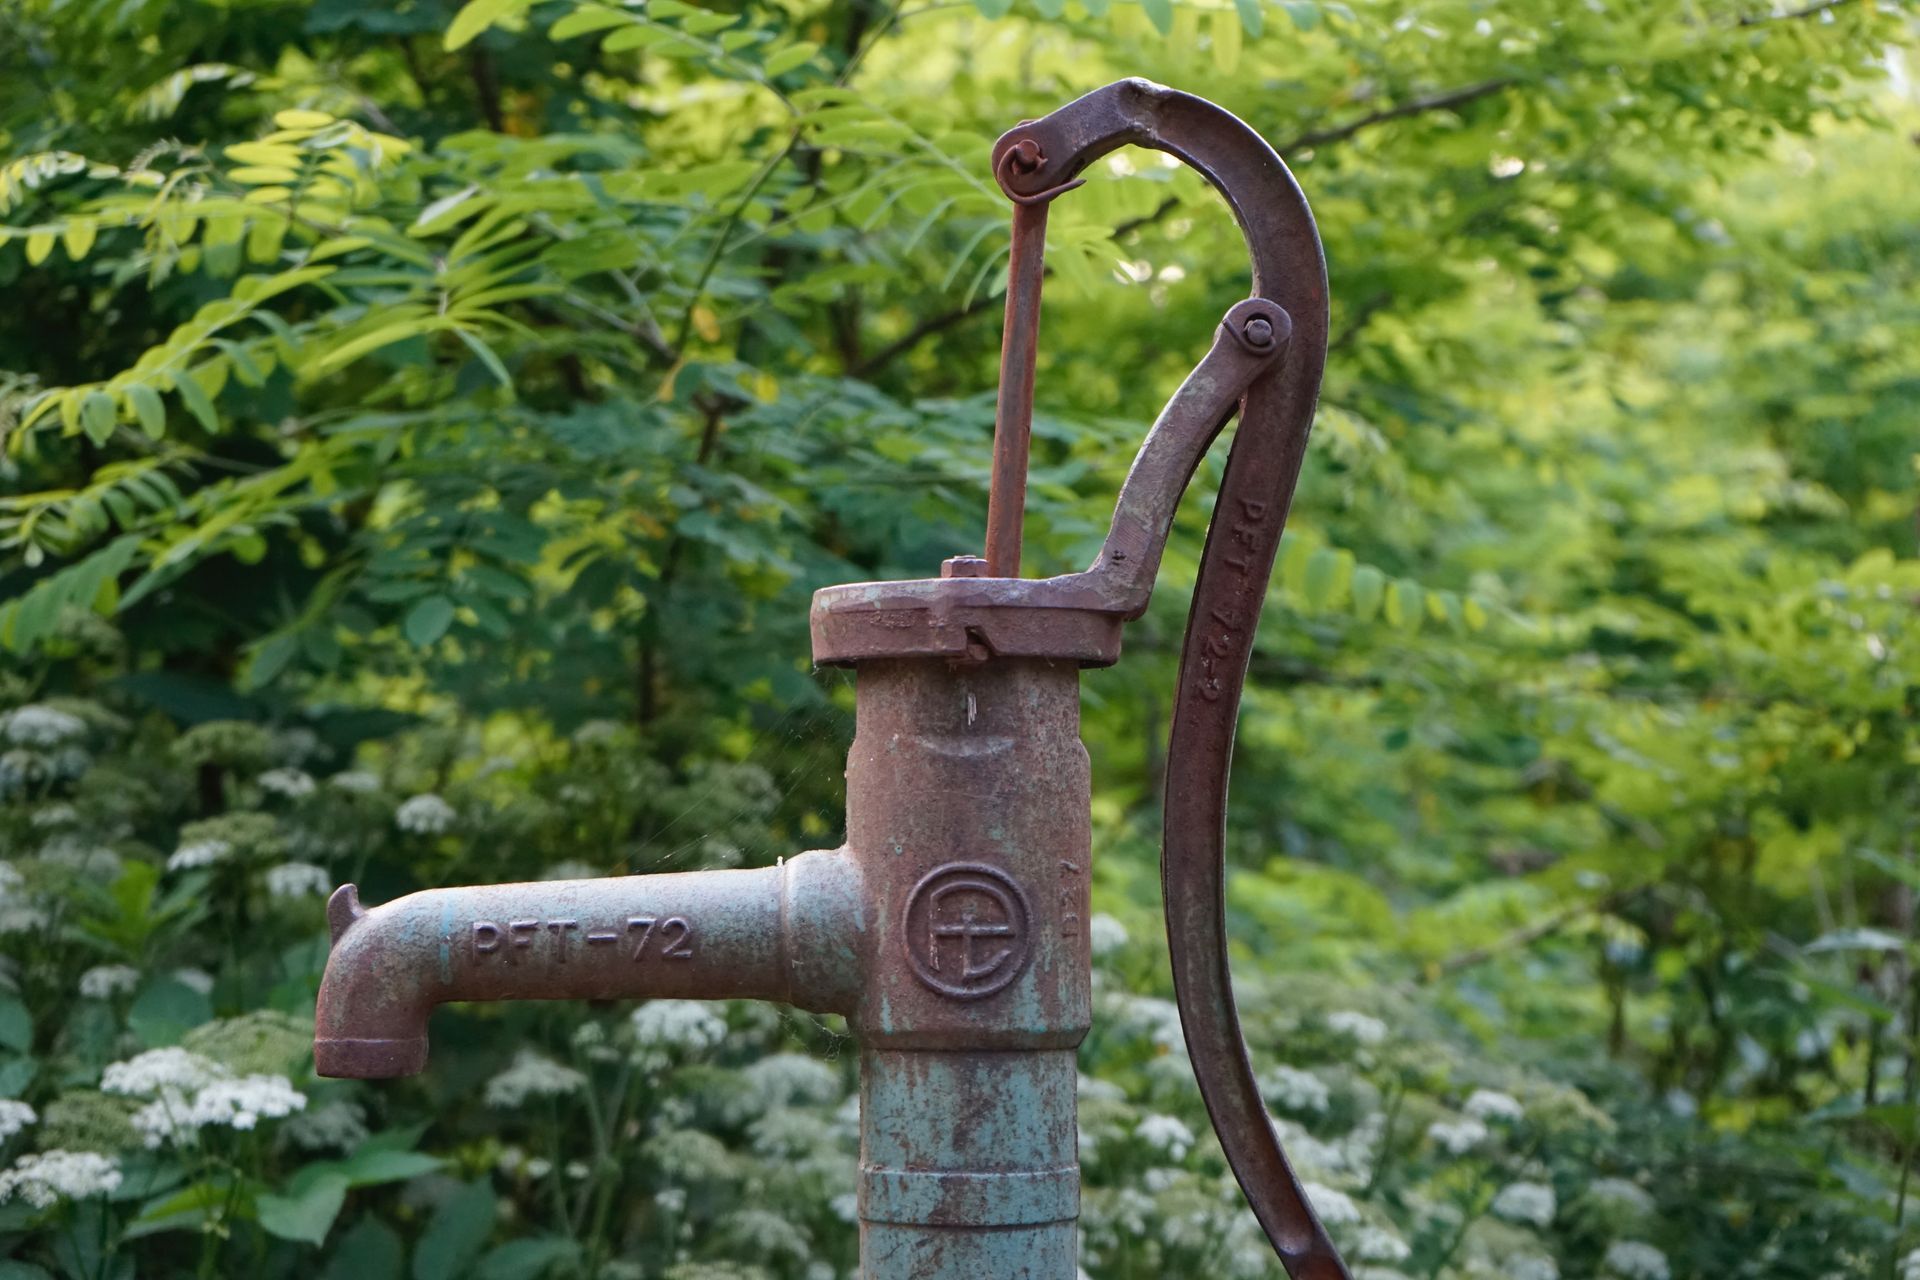 Rustic water pump with a weathered and vintage appearance, surrounded by nature.